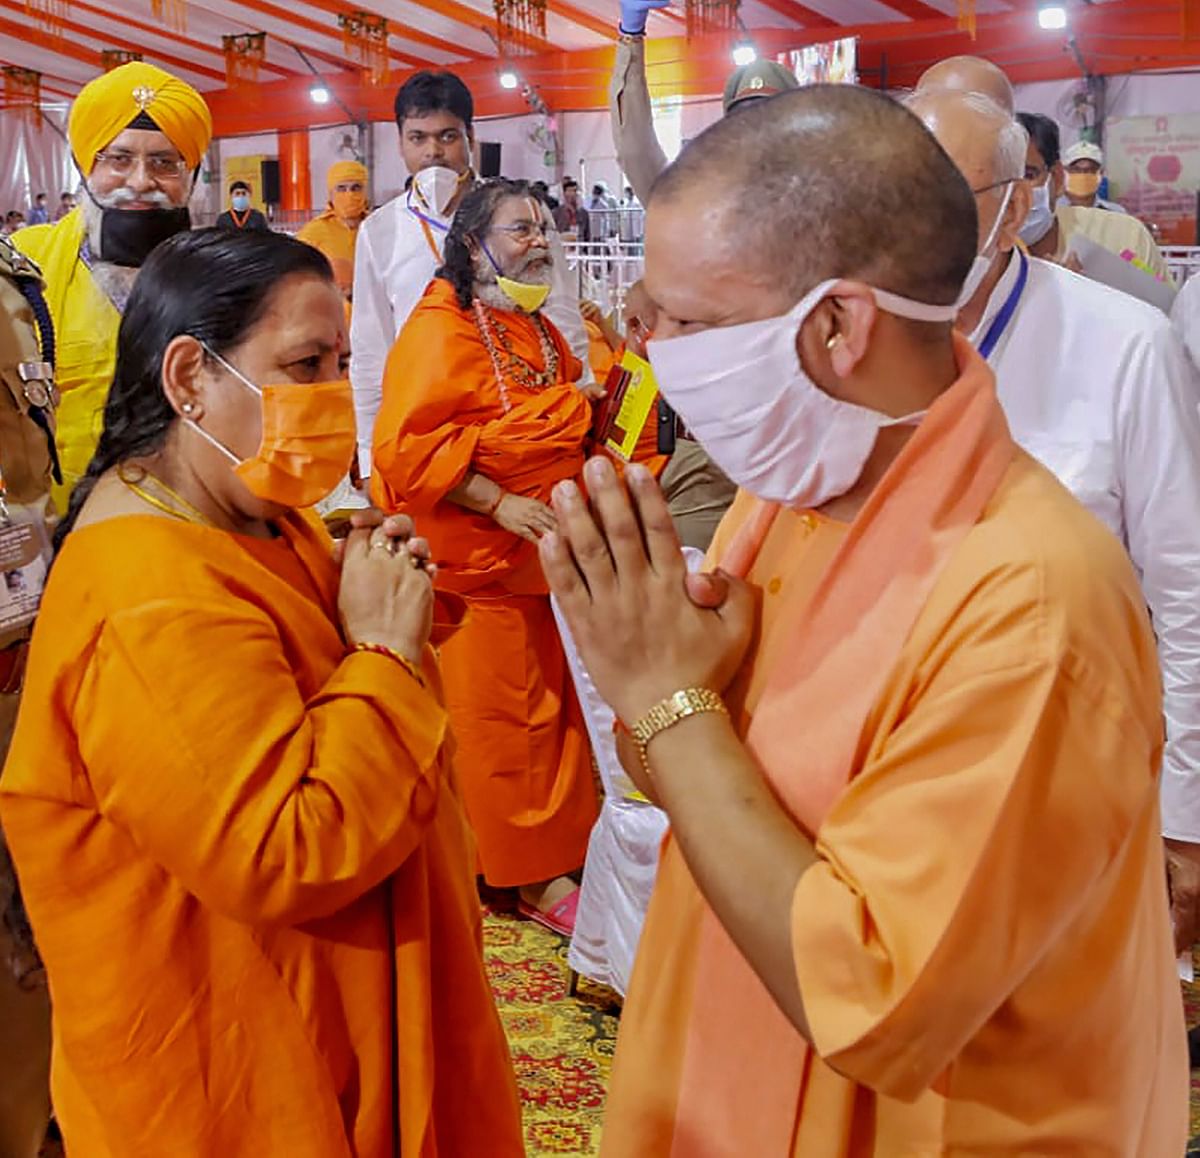 Uttar Pradesh Chief Minister Yogi Adityanath being greeted by BJP leader Uma Bharti during the function ahead of the inception of Bhoomi Pujan. Credit: PTI